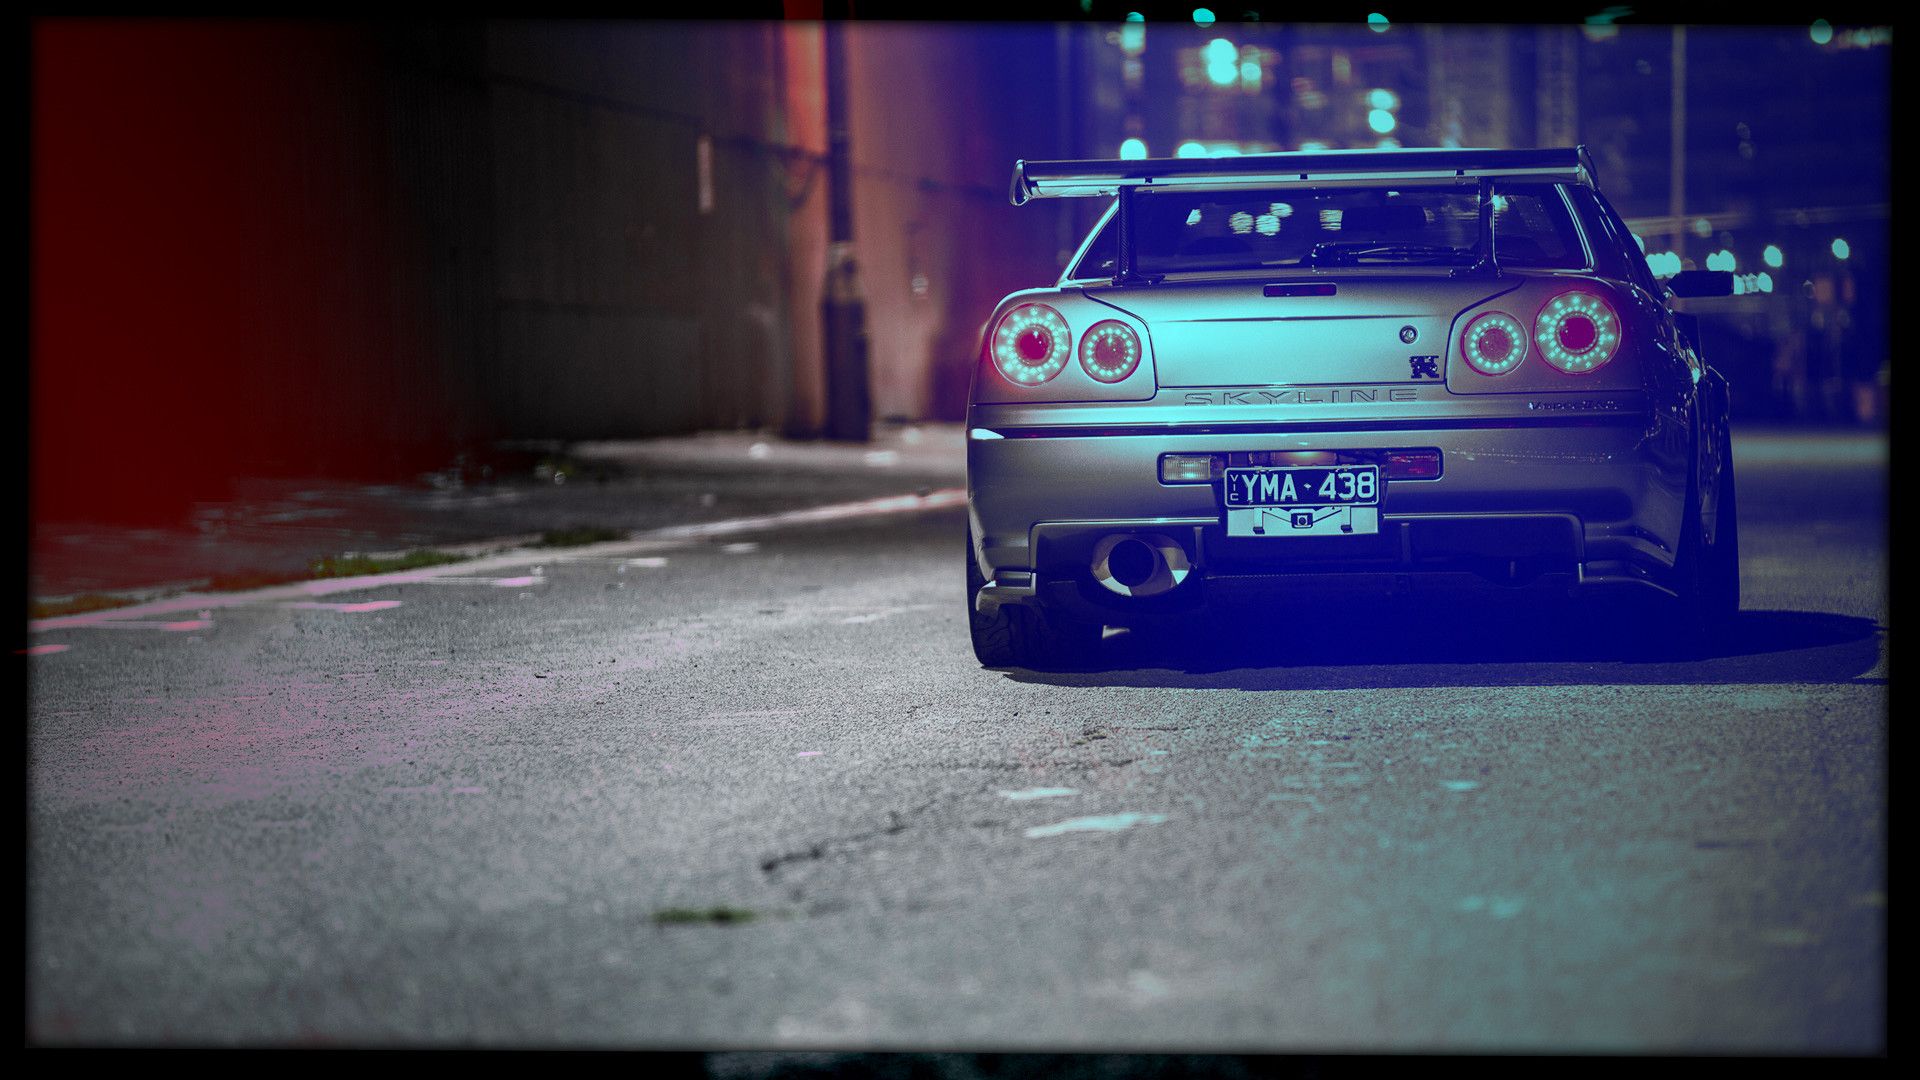 A car is parked on the side of an alley - Nissan Skyline